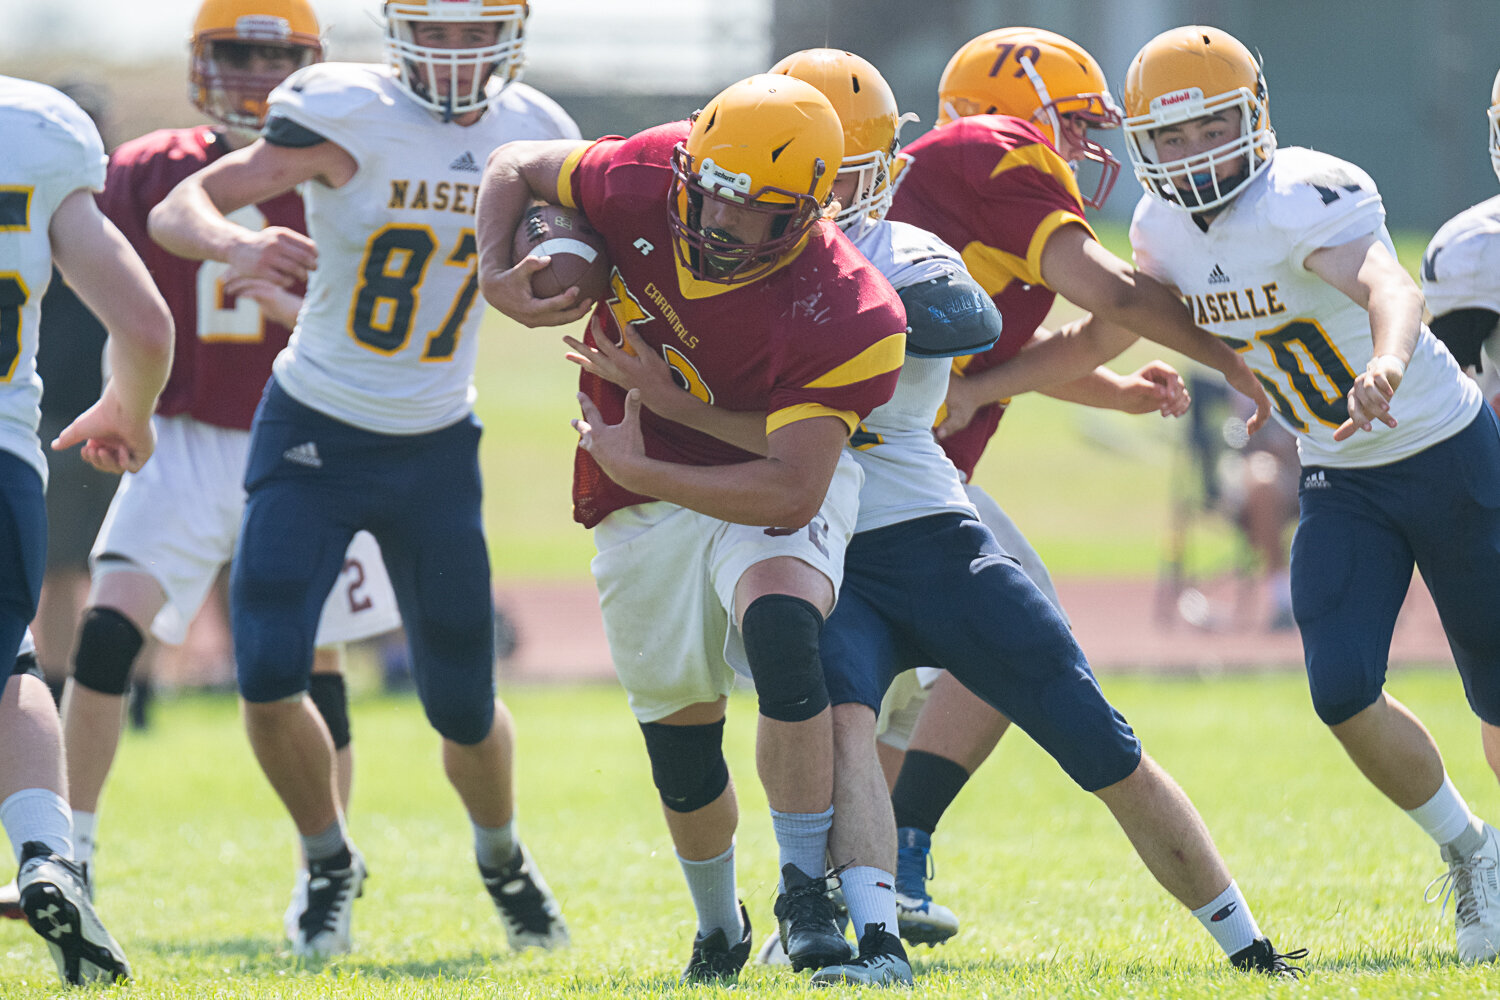 Winlock's James Cusson tries to fight through an arm tackle during the Cardinals' jamboree on Aug. 26.